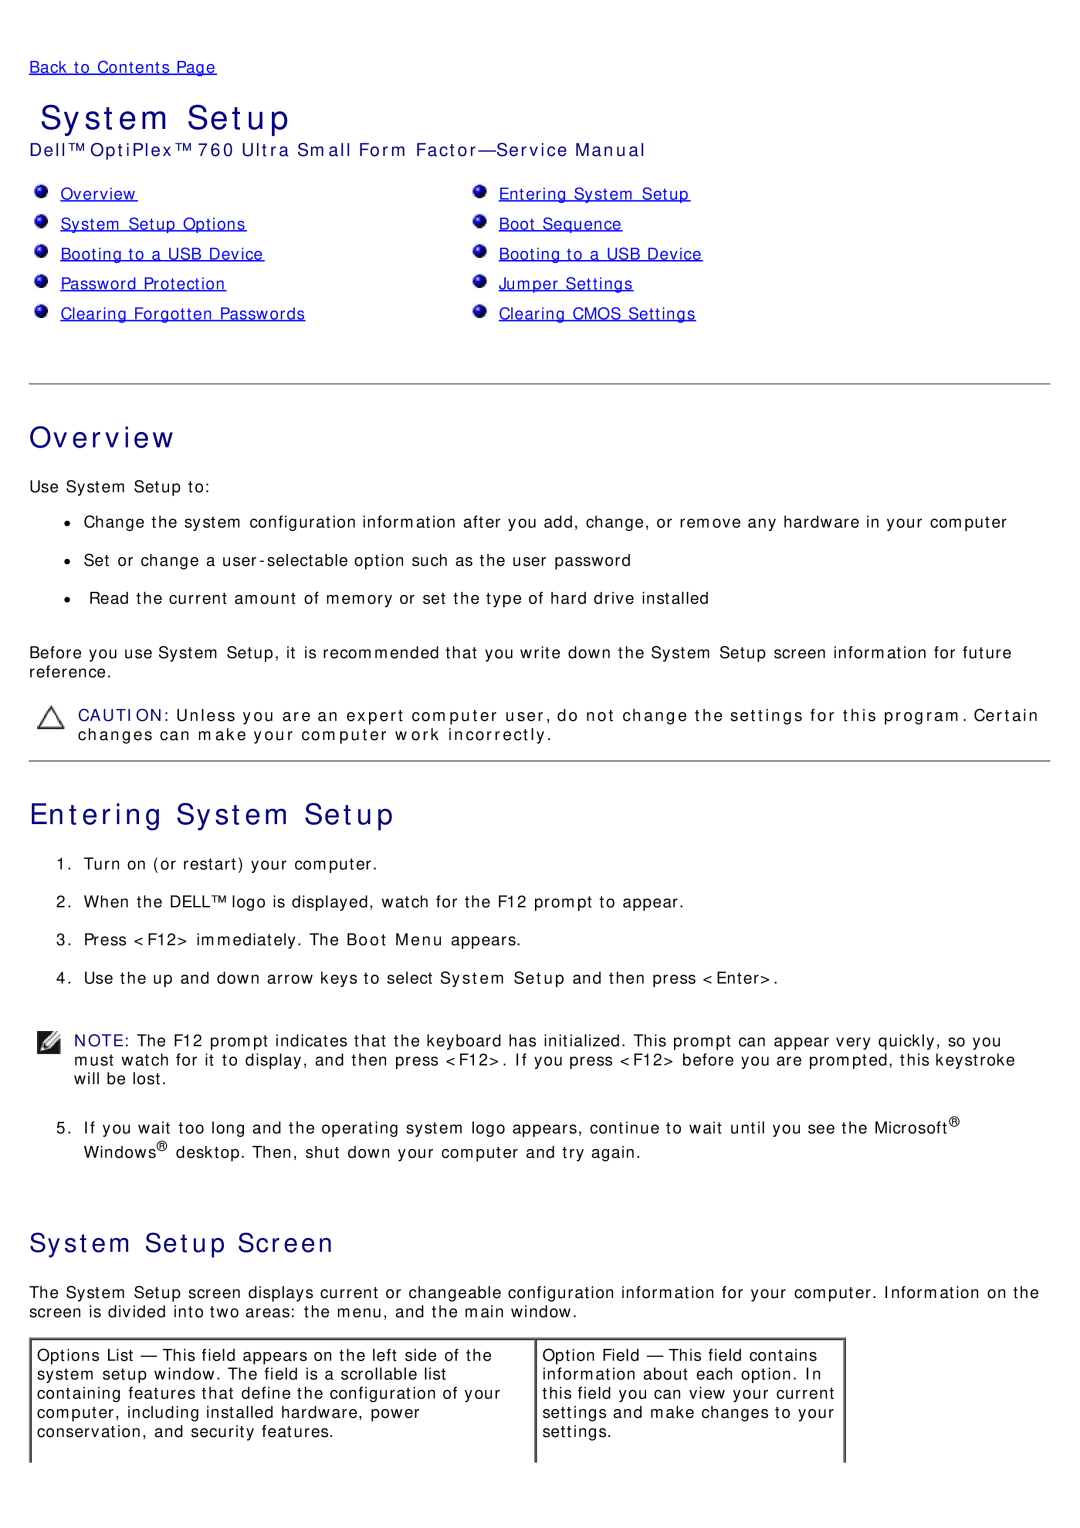 Dell 780 Overview, Entering System Setup, System Setup Screen, System Setup Options, Boot Sequence, Jumper Settings 